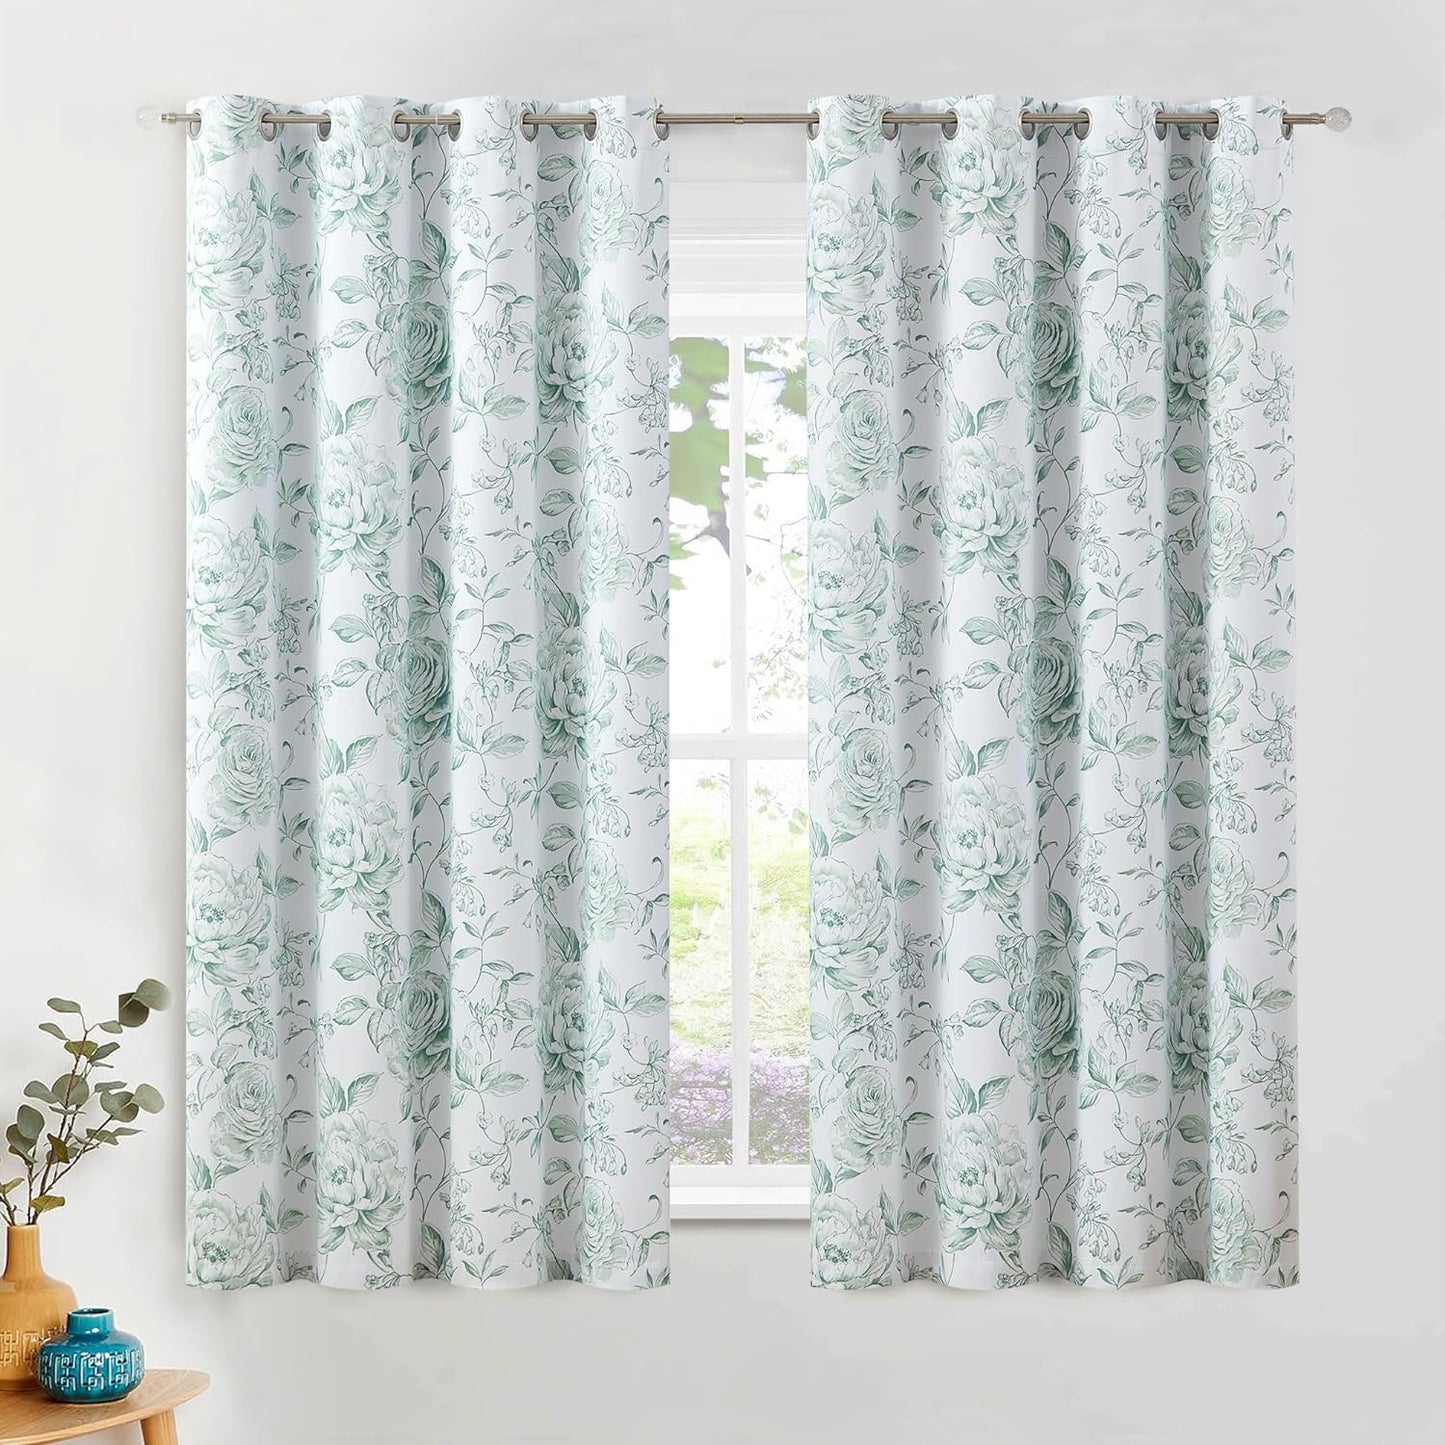 Beauoop Full Blackout Window Curtain Panels Floral Botanical Print Room Darkening Thermal Insulated Drapes Rose Grommet Window Treatment for Bedroom Theatre Office, 52 X 63 Inch, White/Blue, 2 Panels  Beauoop Green 50"X63"X2 